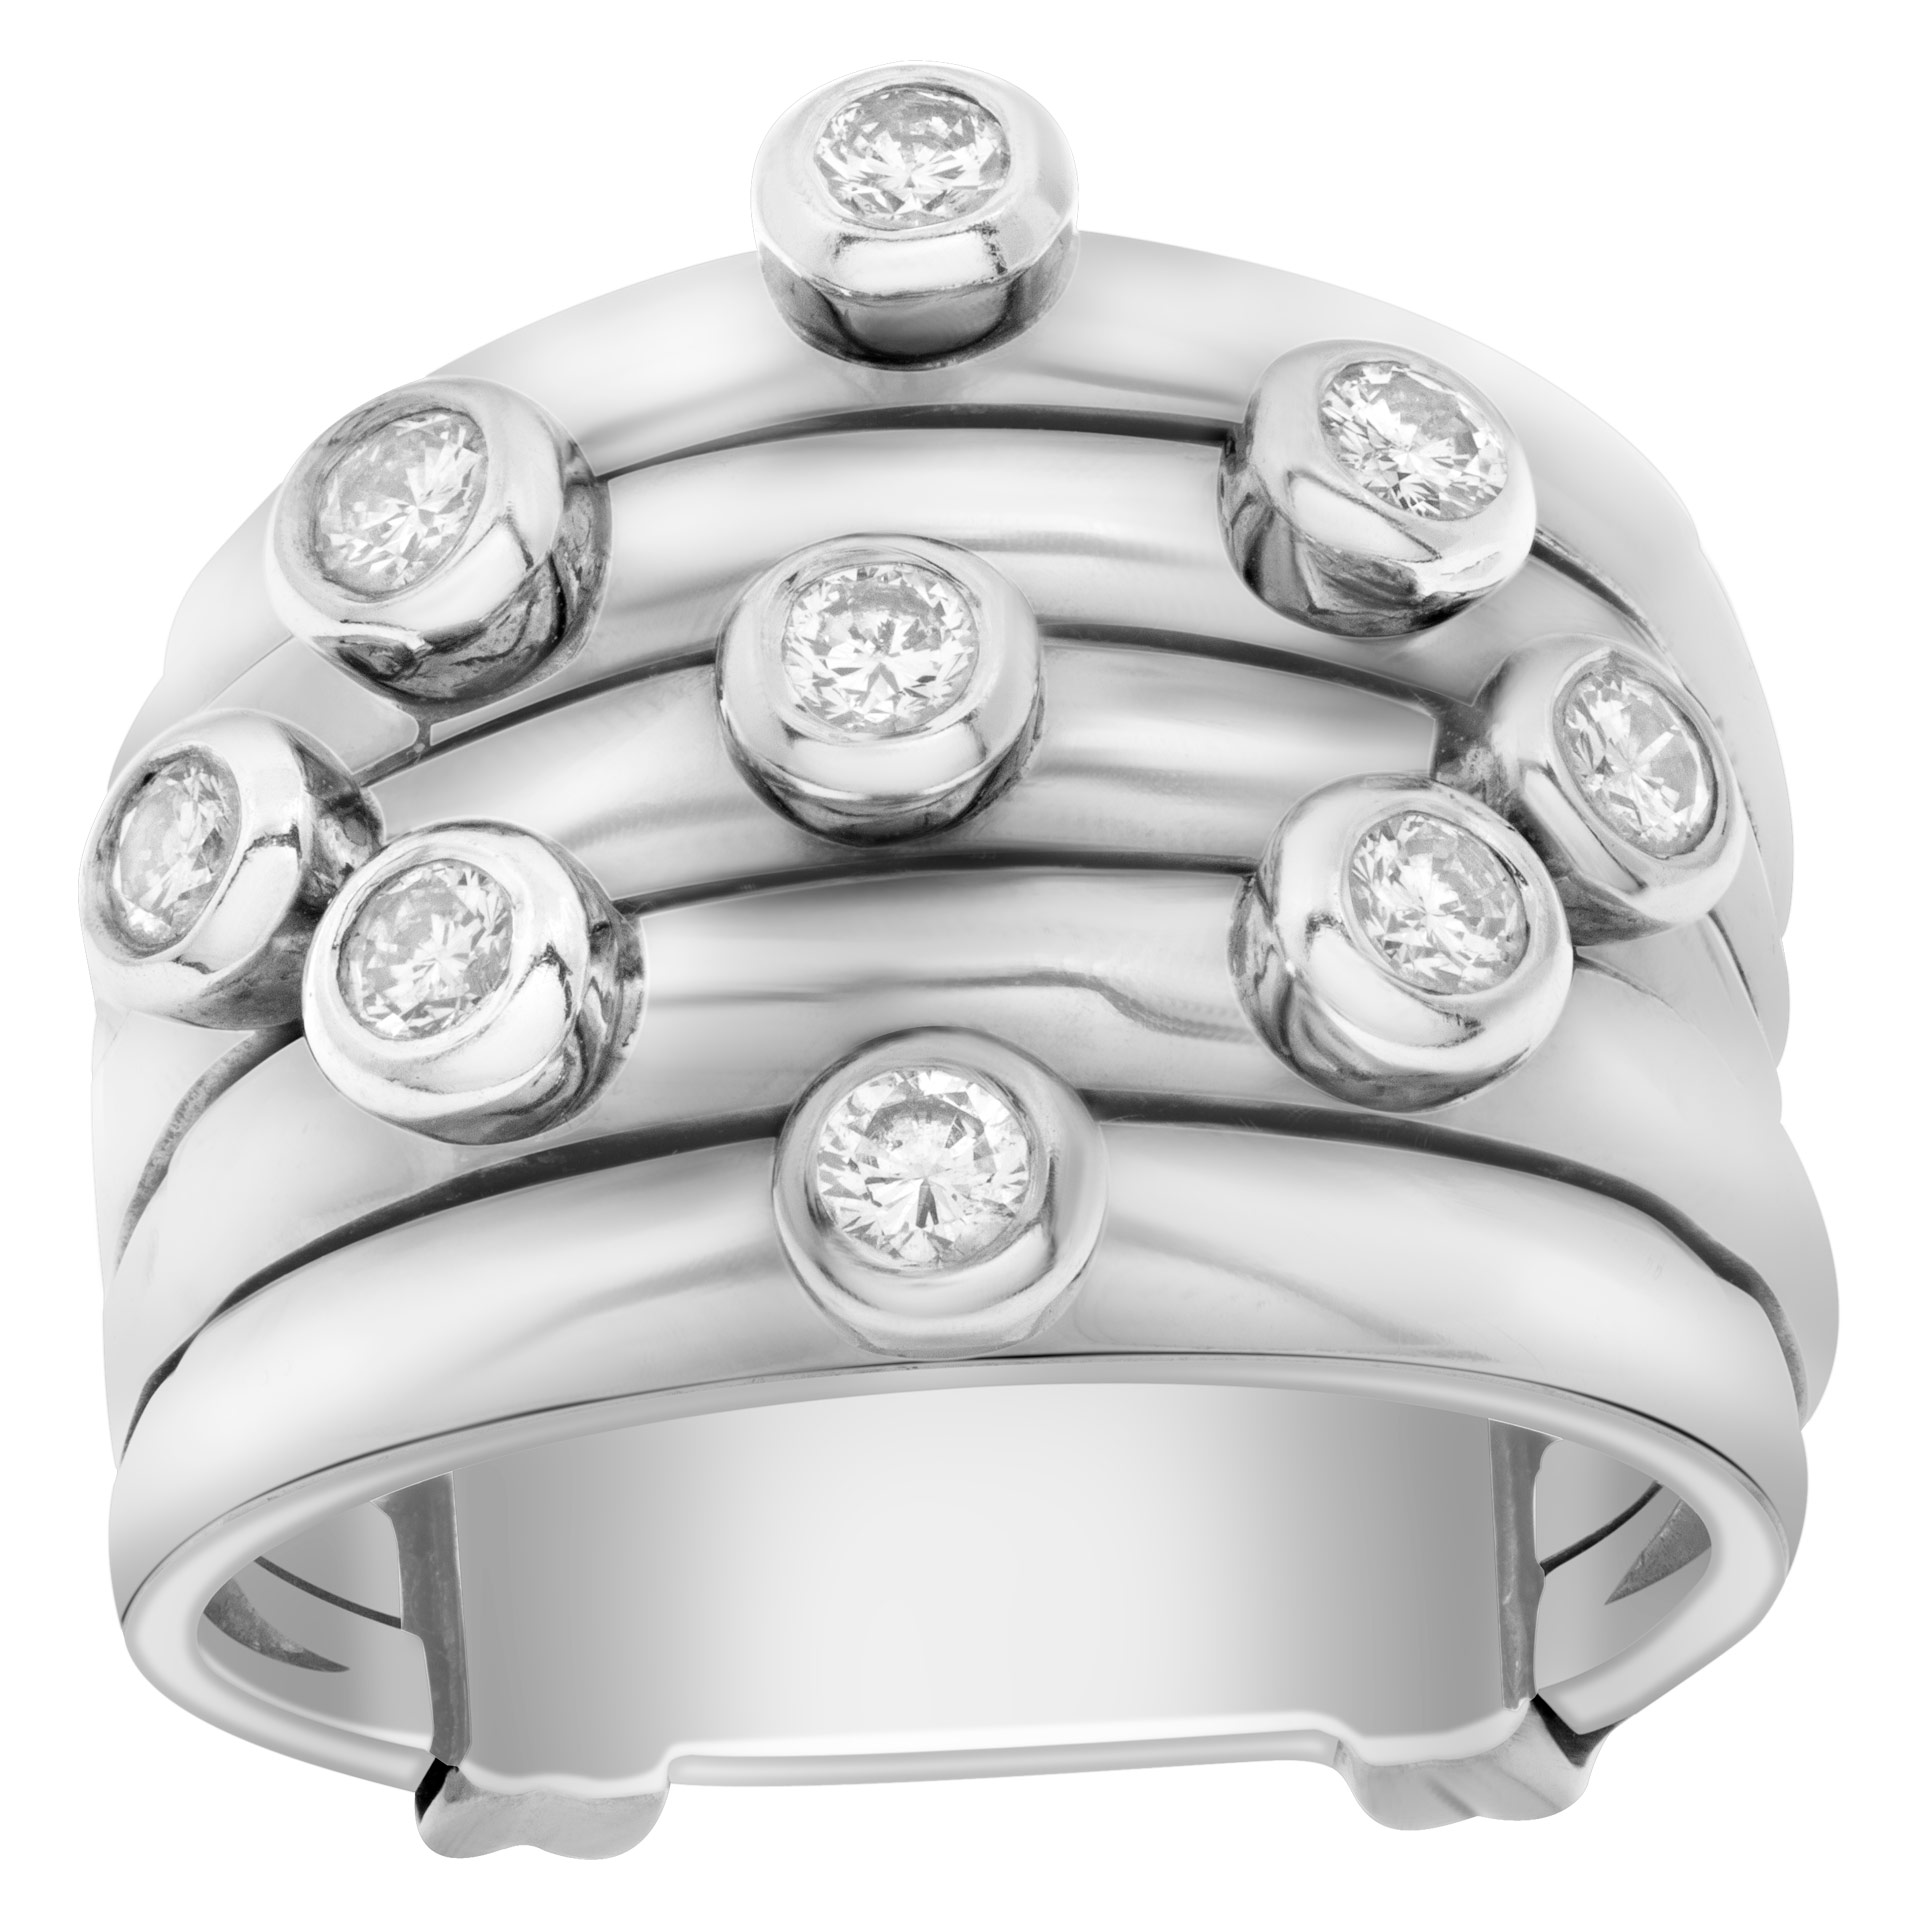 Wide diamonds ring set in 18k white gold. Round brilliant bezeled set diamonds total approx. weight: 1.00 carat image 1